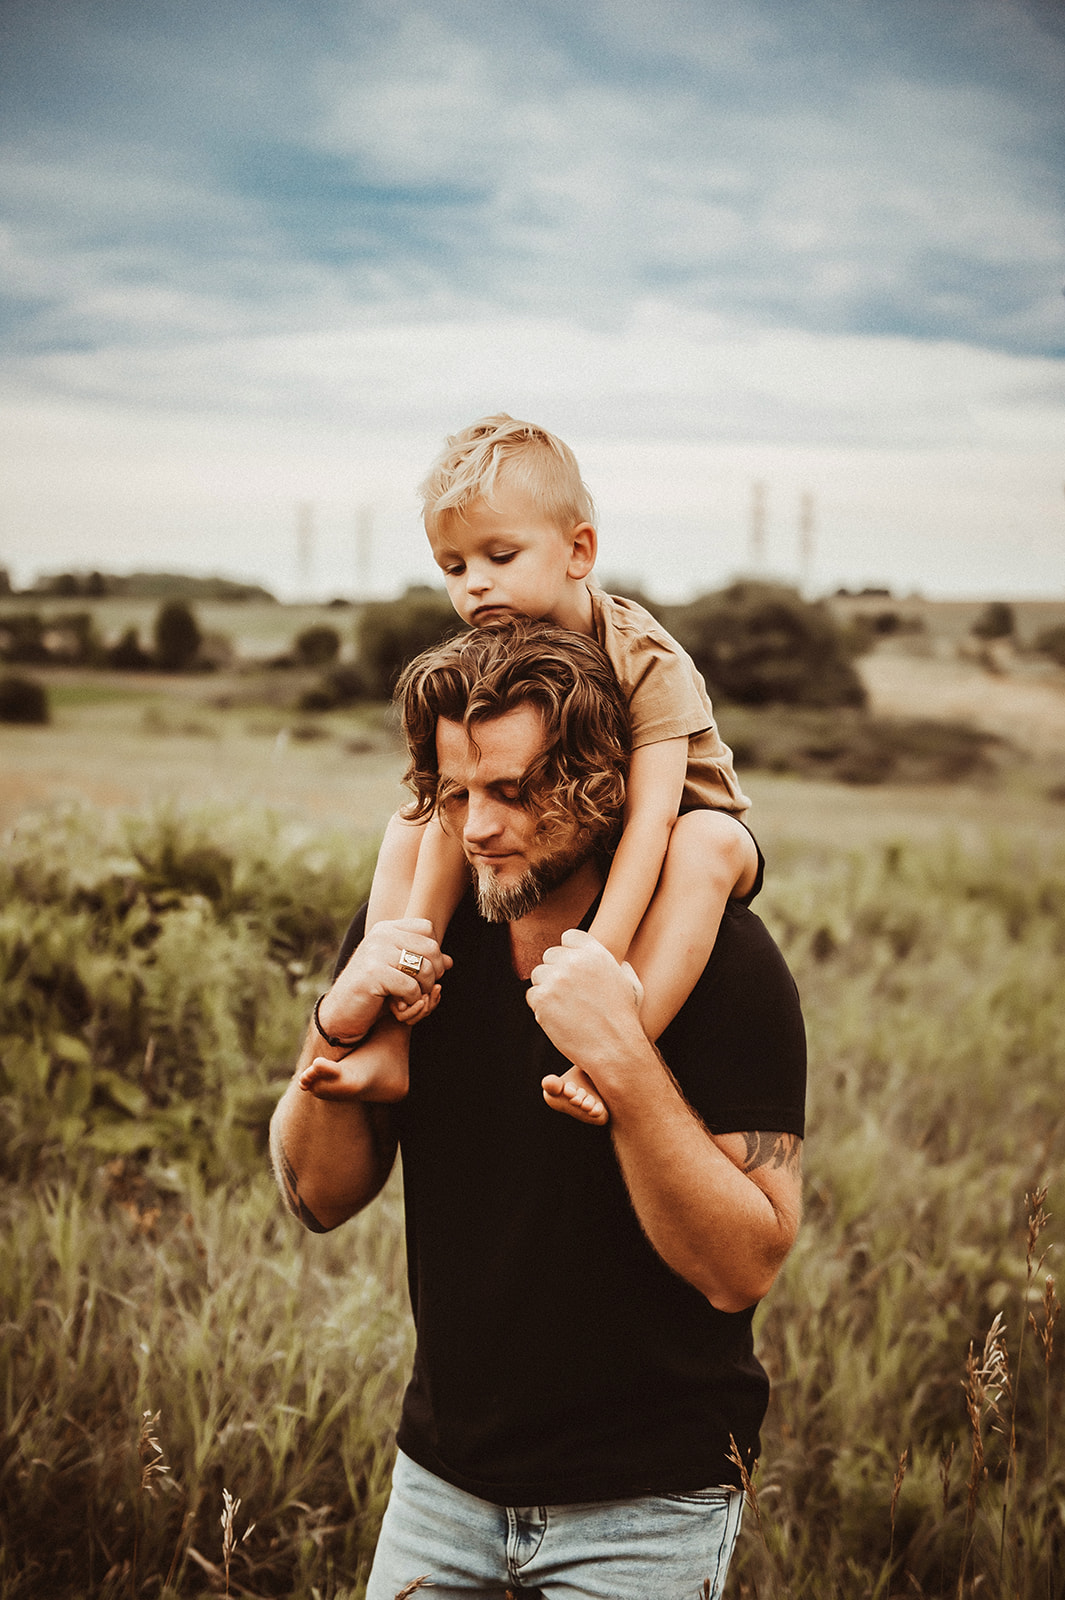 father carrying his son across a field in the durham region